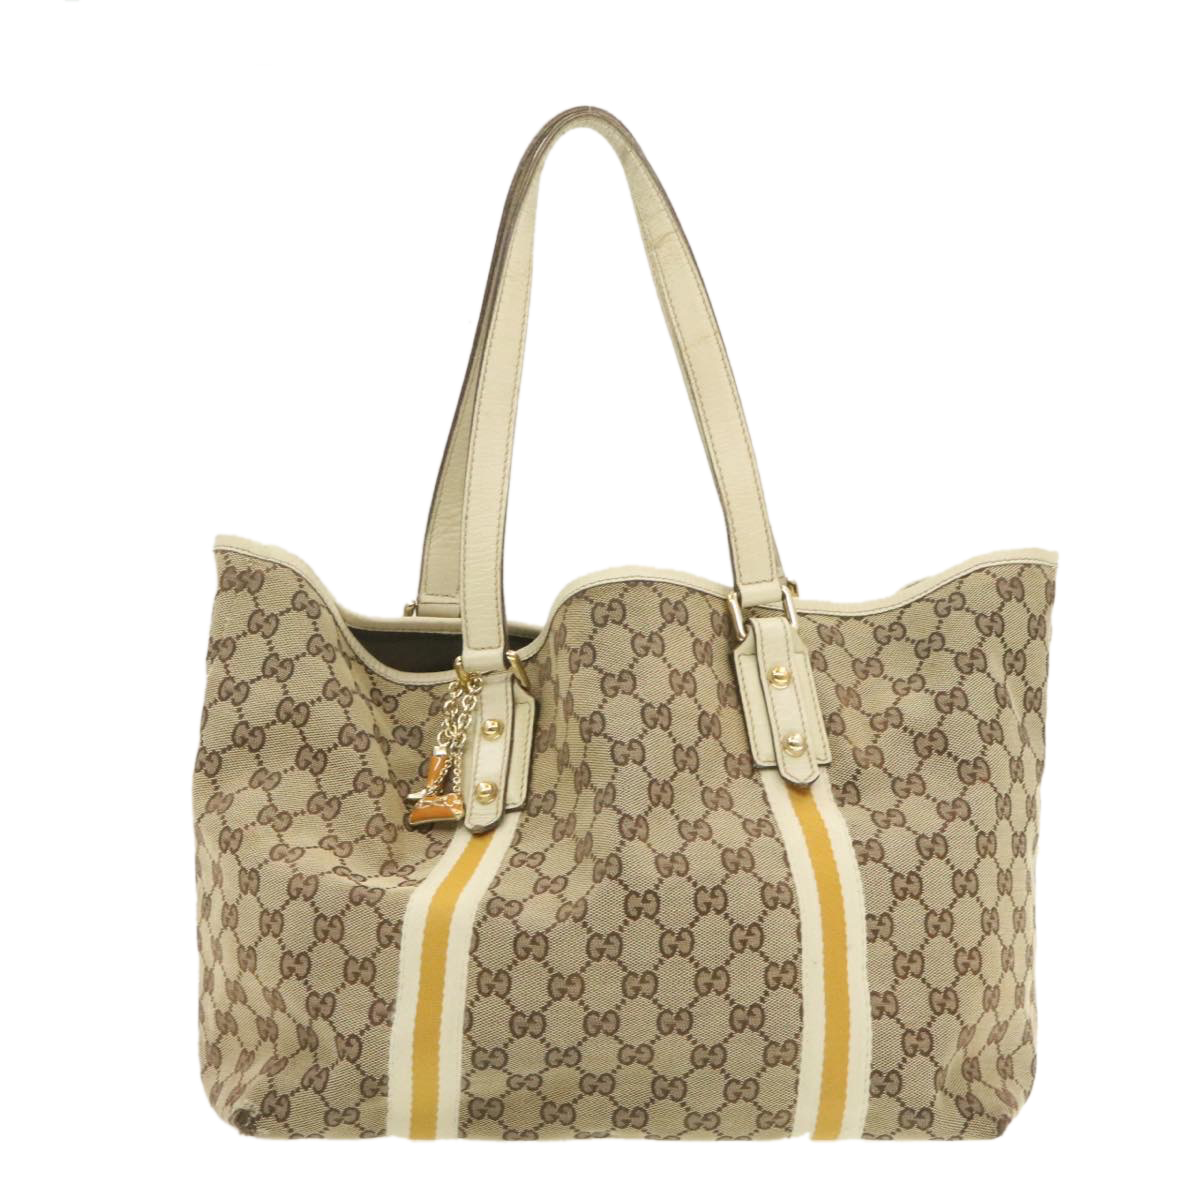 GUCCI Sherry Line GG Canvas Tote Bag Beige Auth 18903 | eBay